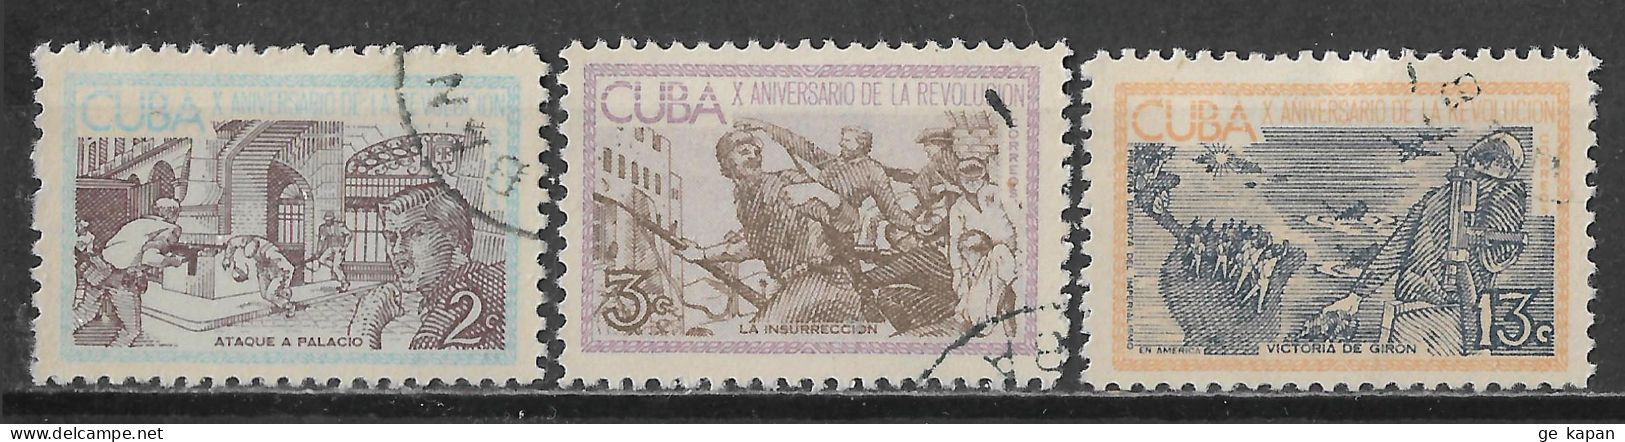 1963 CUBA SET OF 3 USED STAMPS (Michel # 853,854,858) CV €1.70 - Gebraucht